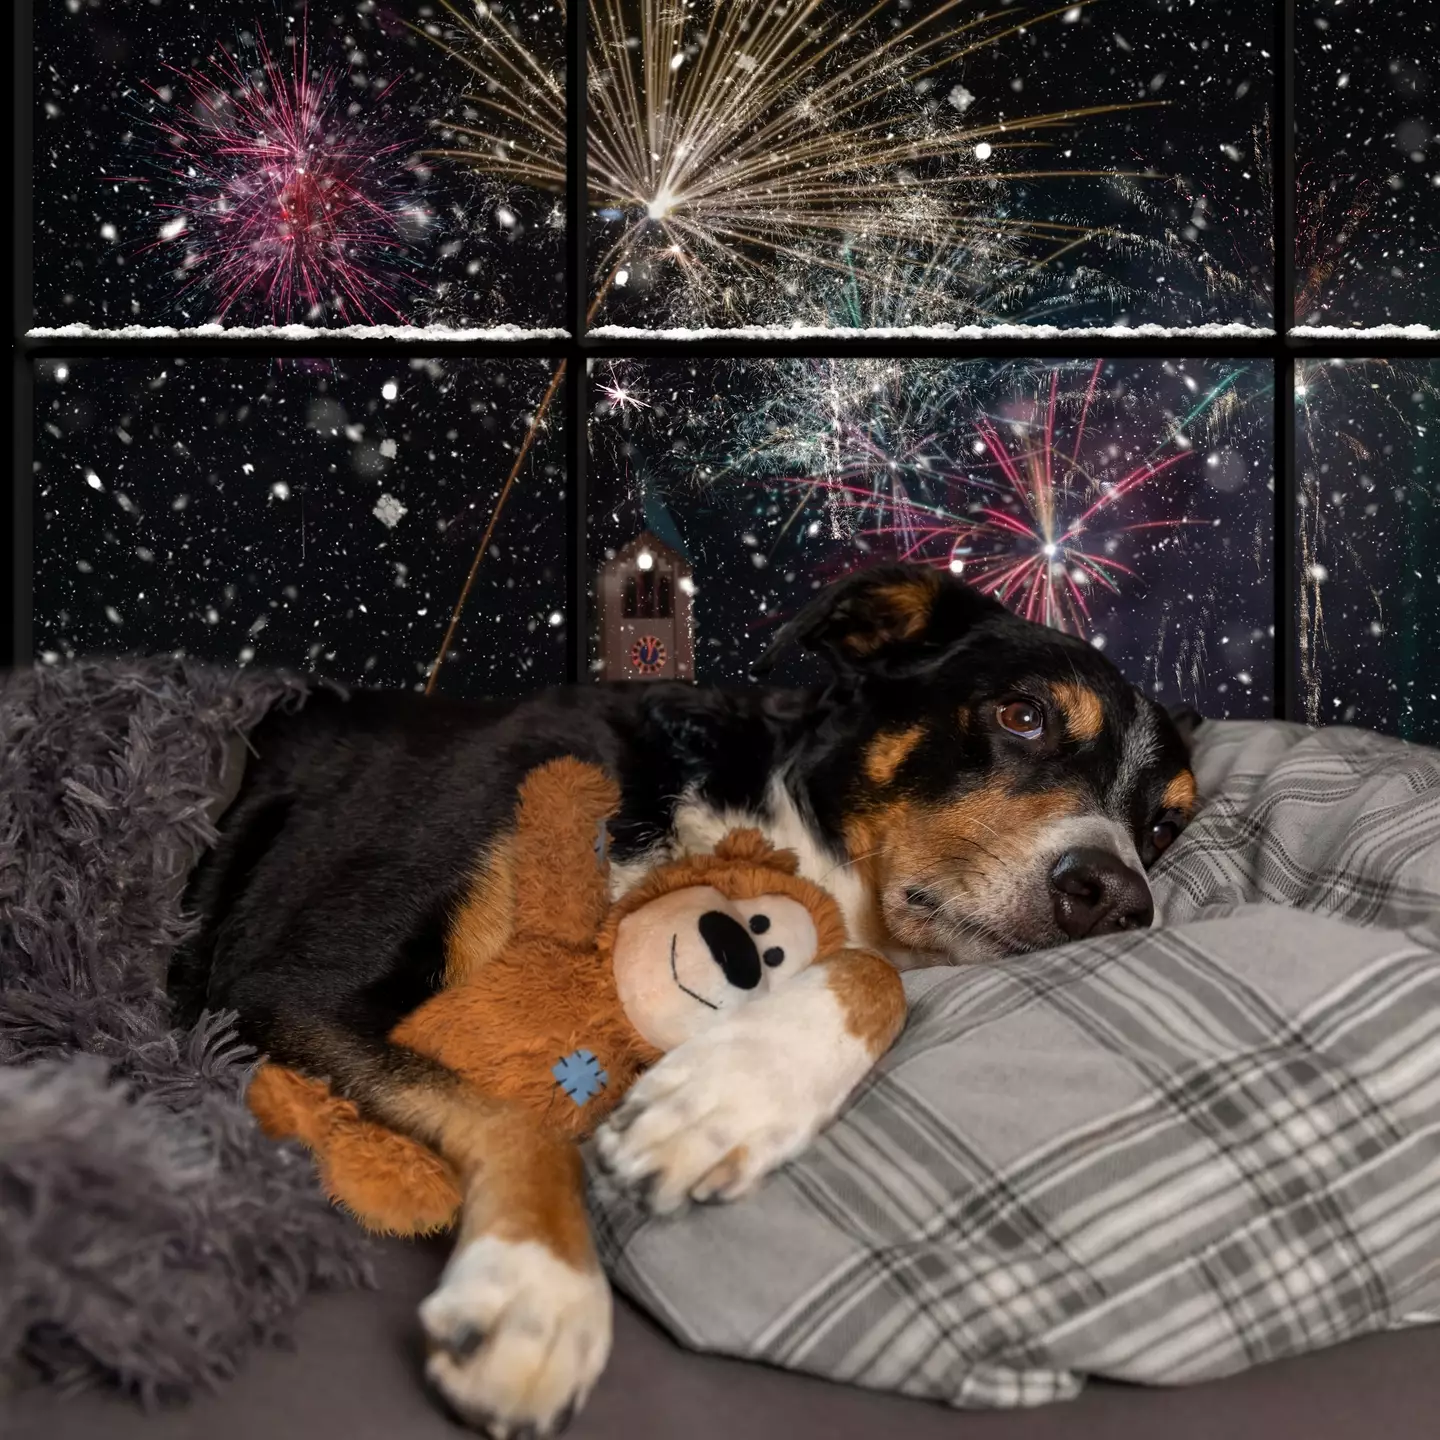 Let your dog take shelter when the fireworks start and be there for them if they want to play with you.